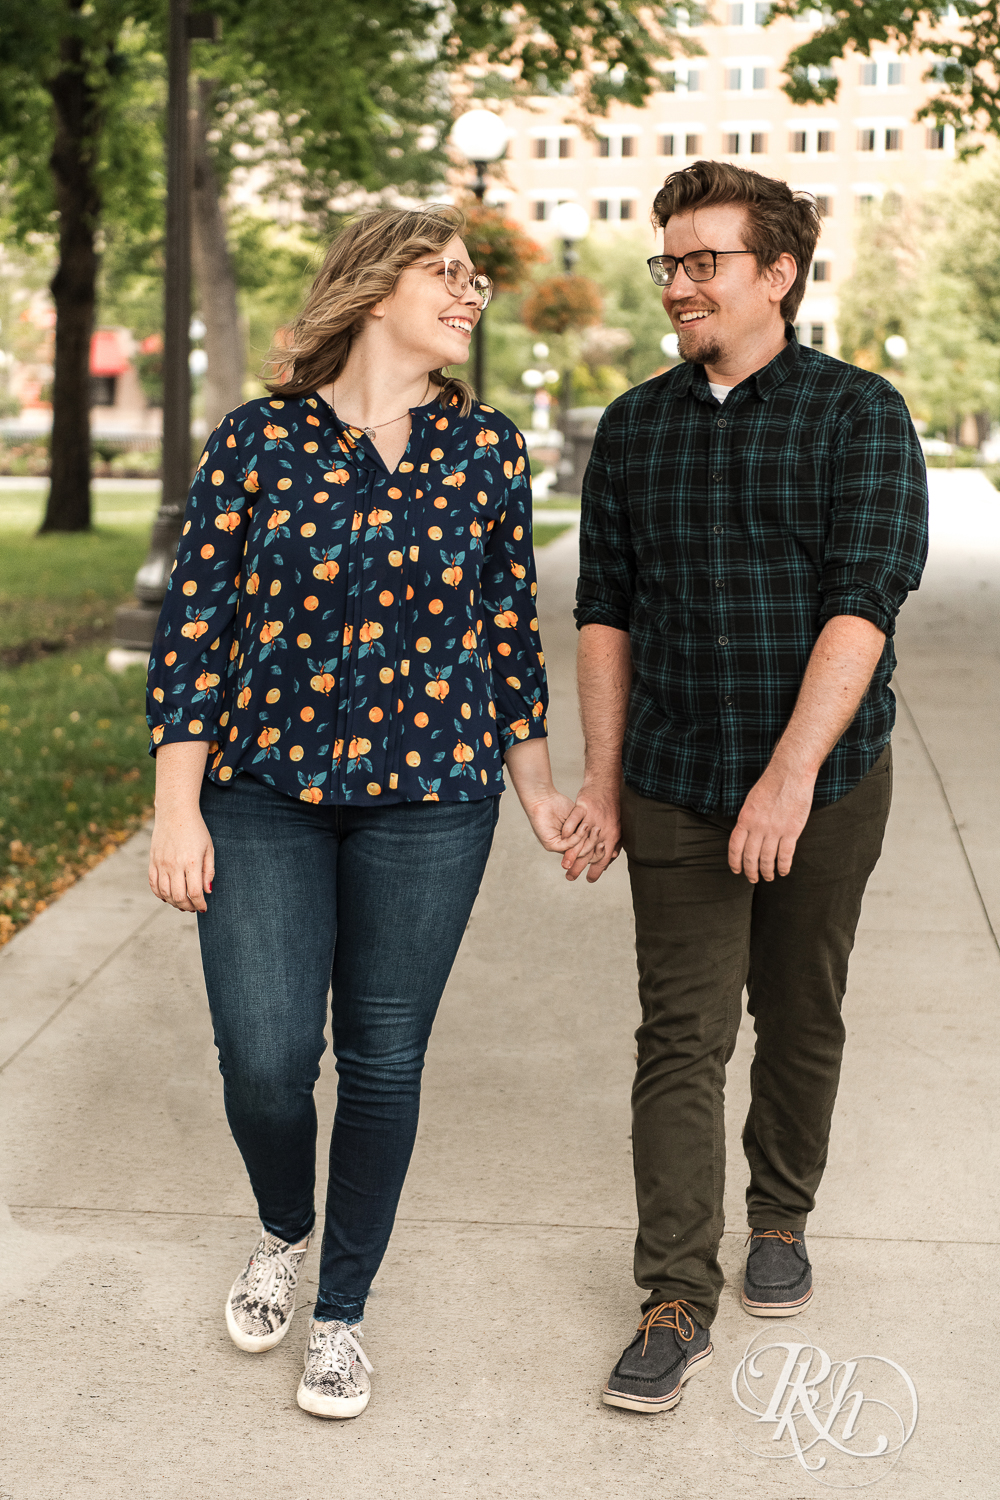 Blond woman with glasses and man with glasses walk on sidewalk in Saint Paul, Minnesota.